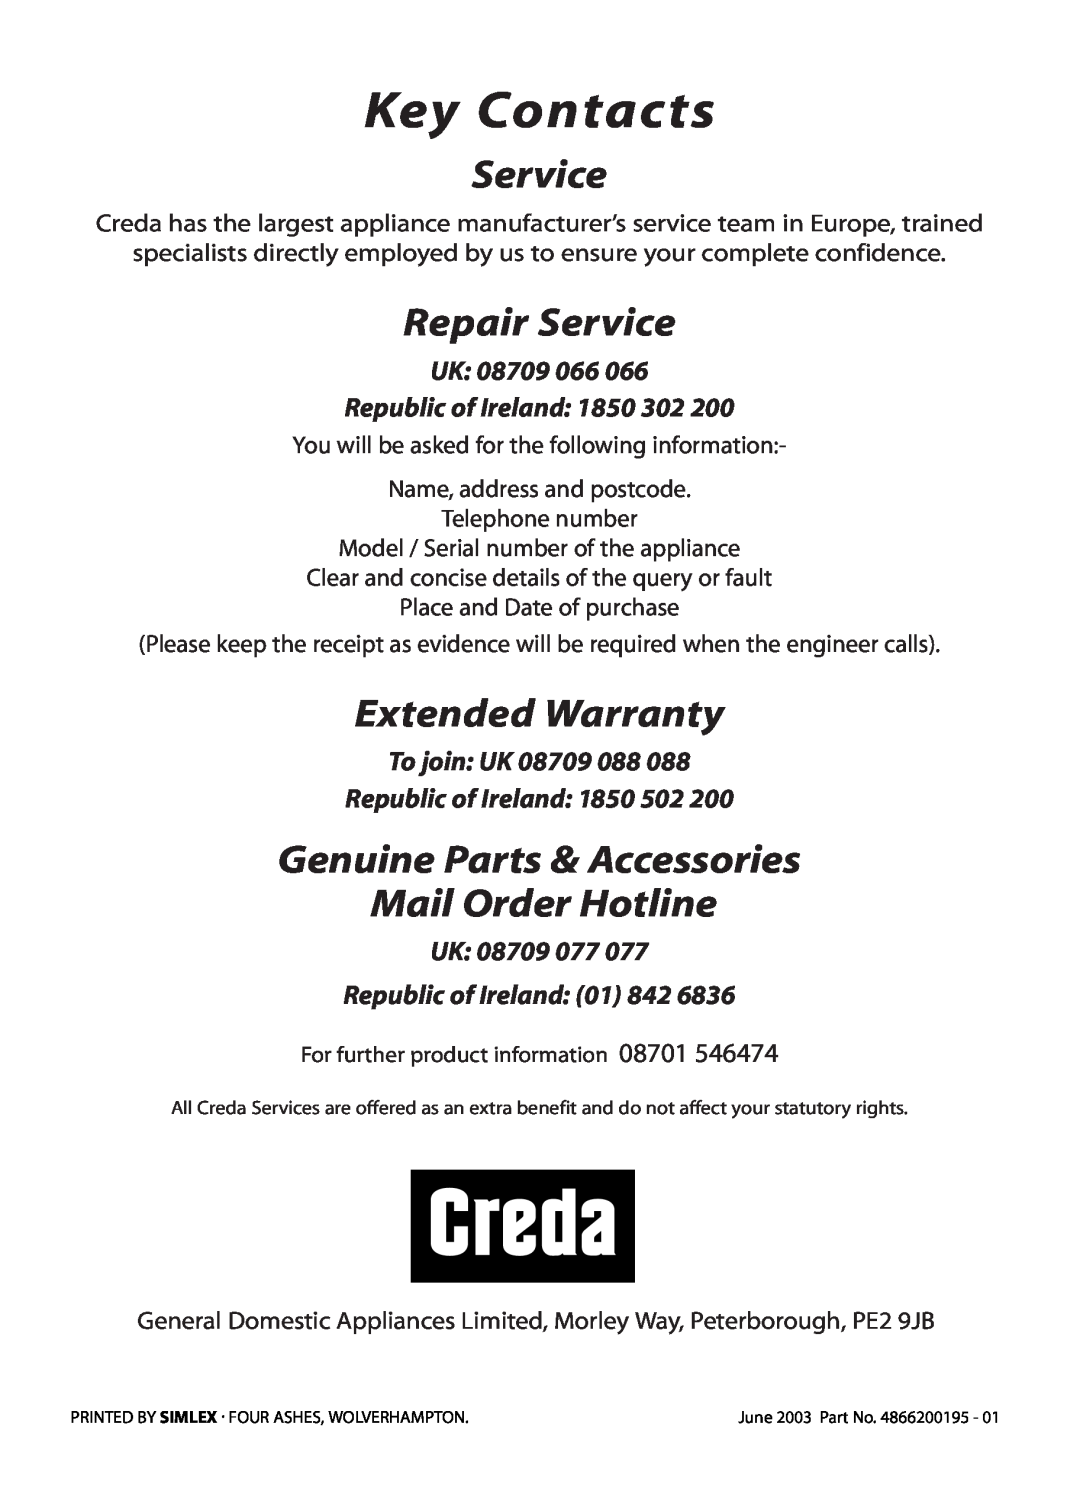 Creda S220E manual Key Contacts, Repair Service, Extended Warranty, Genuine Parts & Accessories Mail Order Hotline 